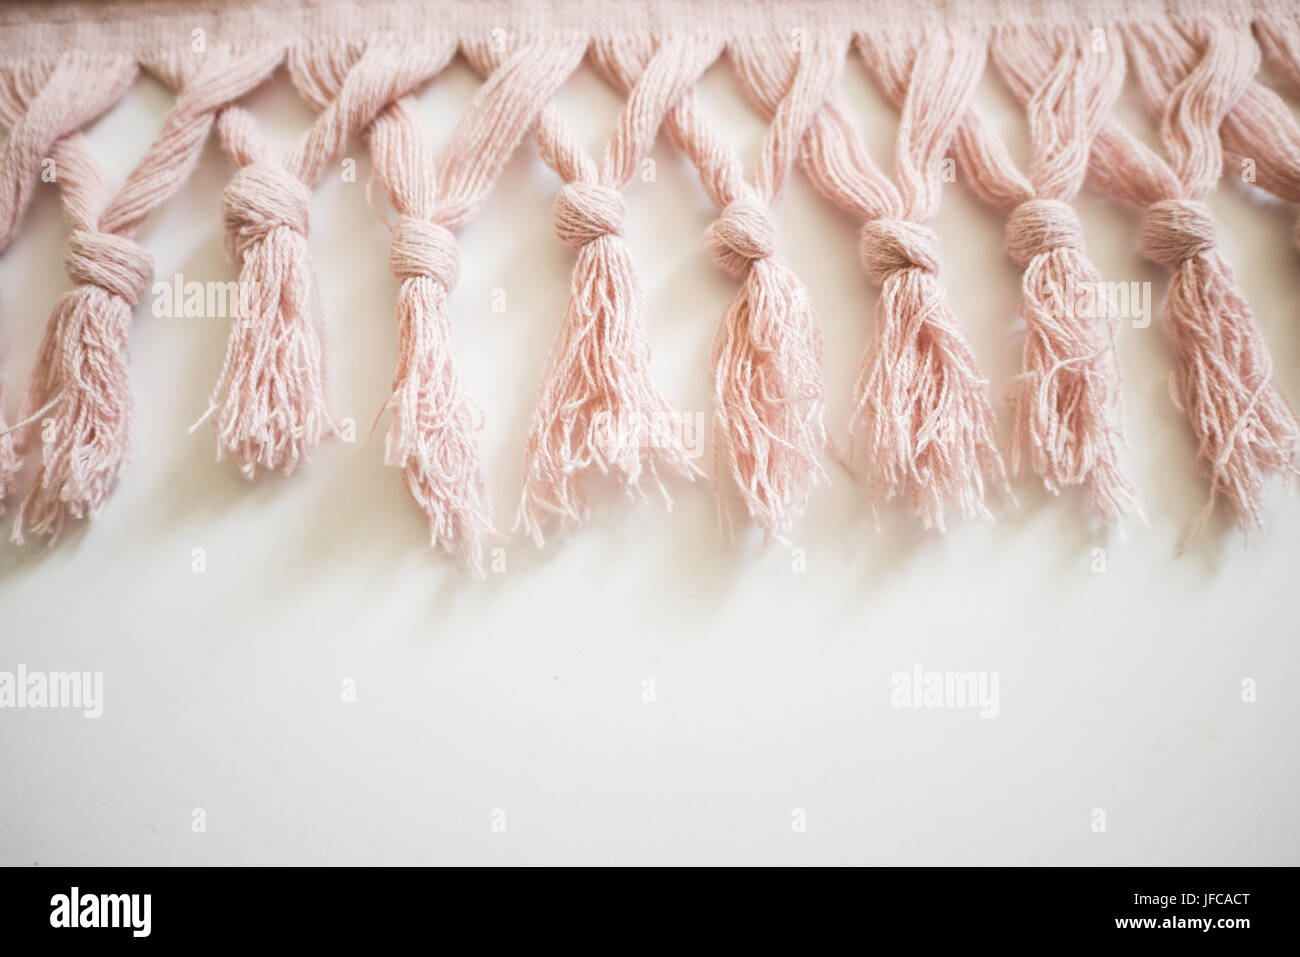 Tassels of a textile on a white background. Pink towel. Stock Photo